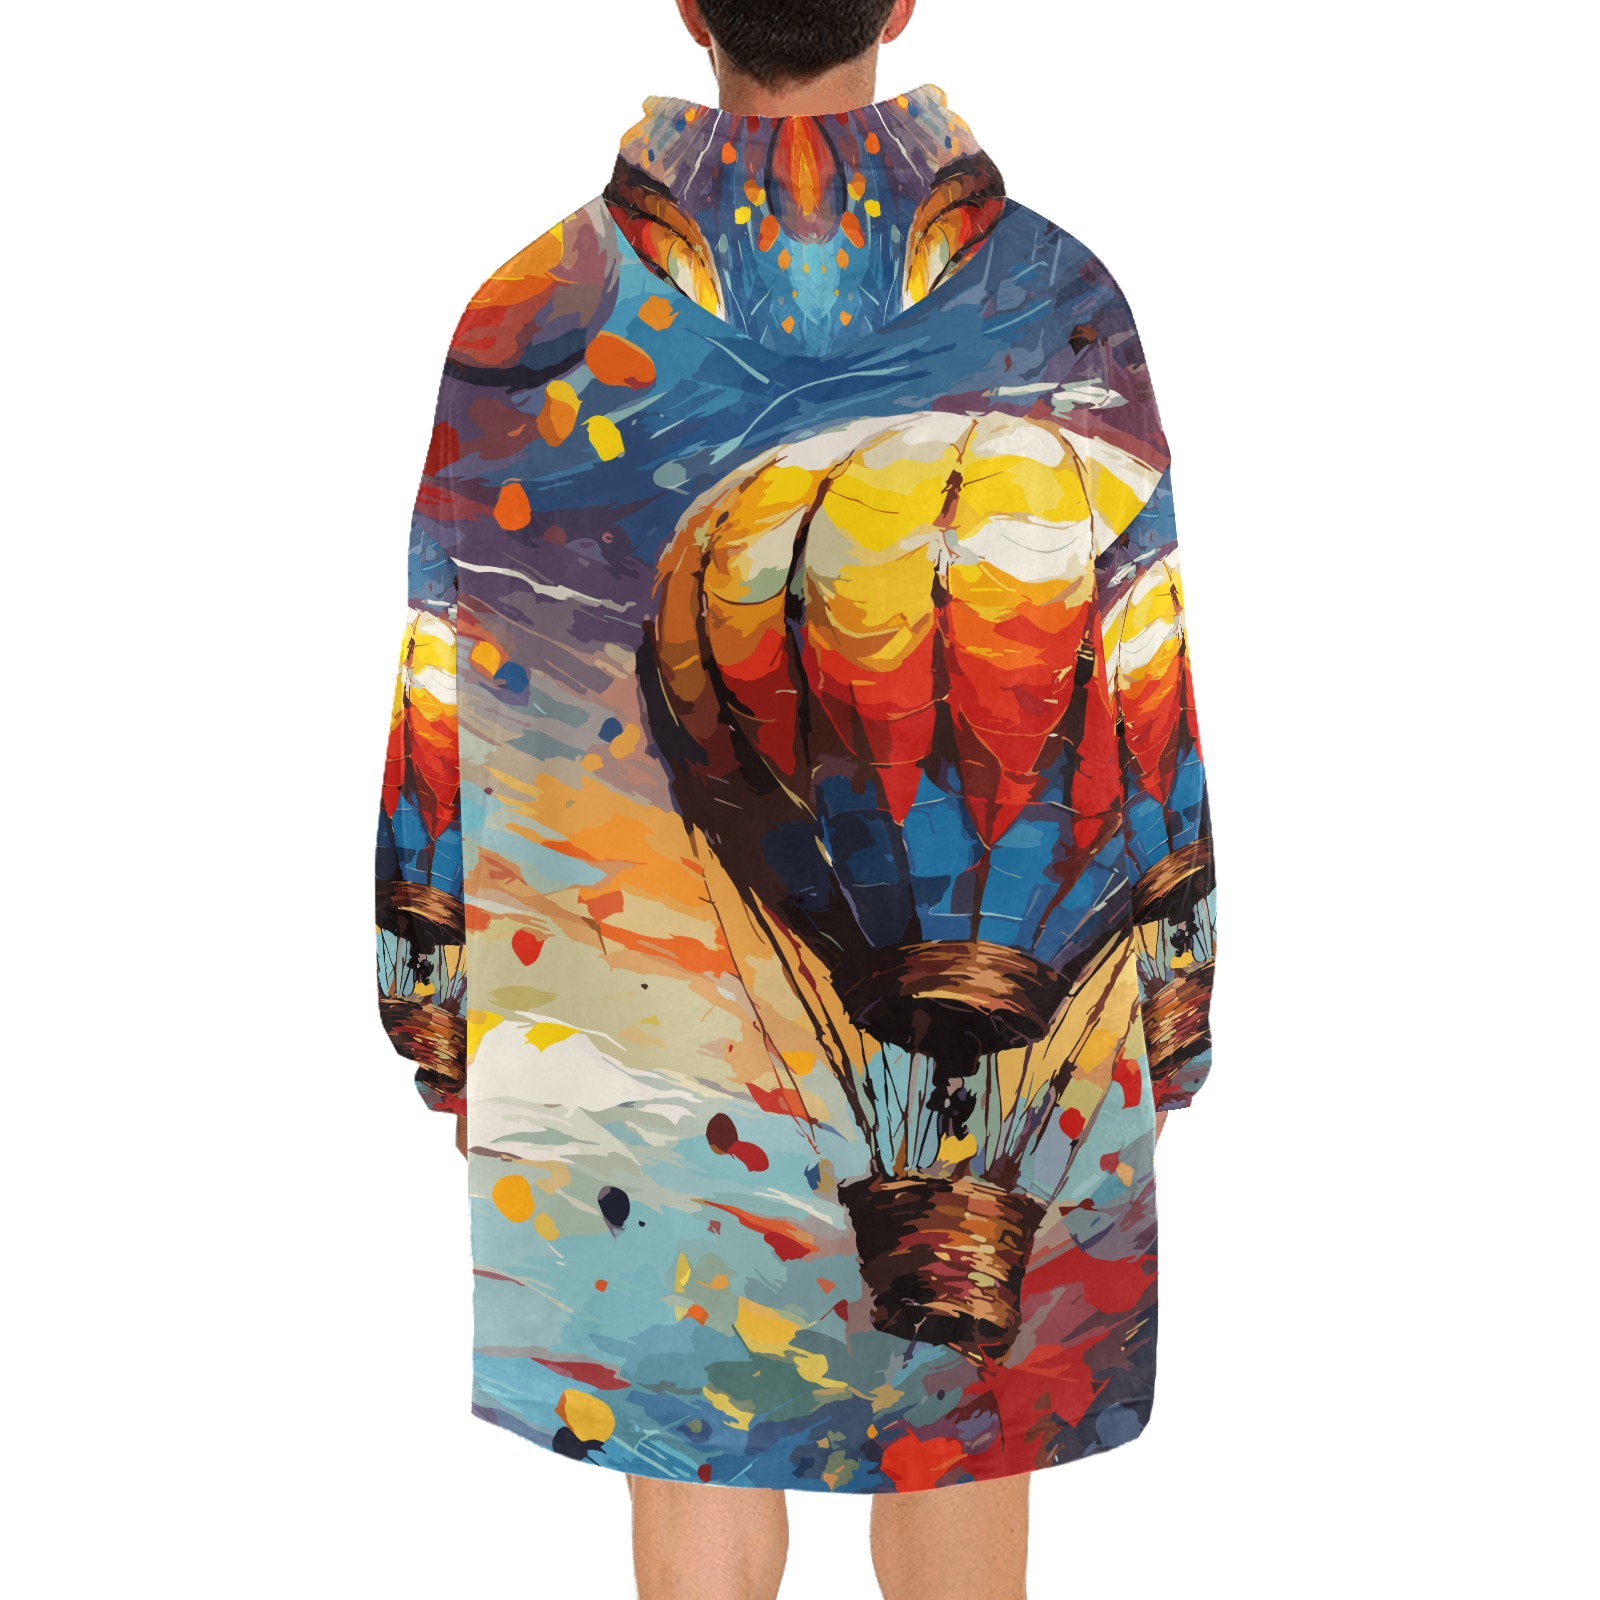 Hot air balloon, sky and sun colorful art. Blanket Hoodie for Men